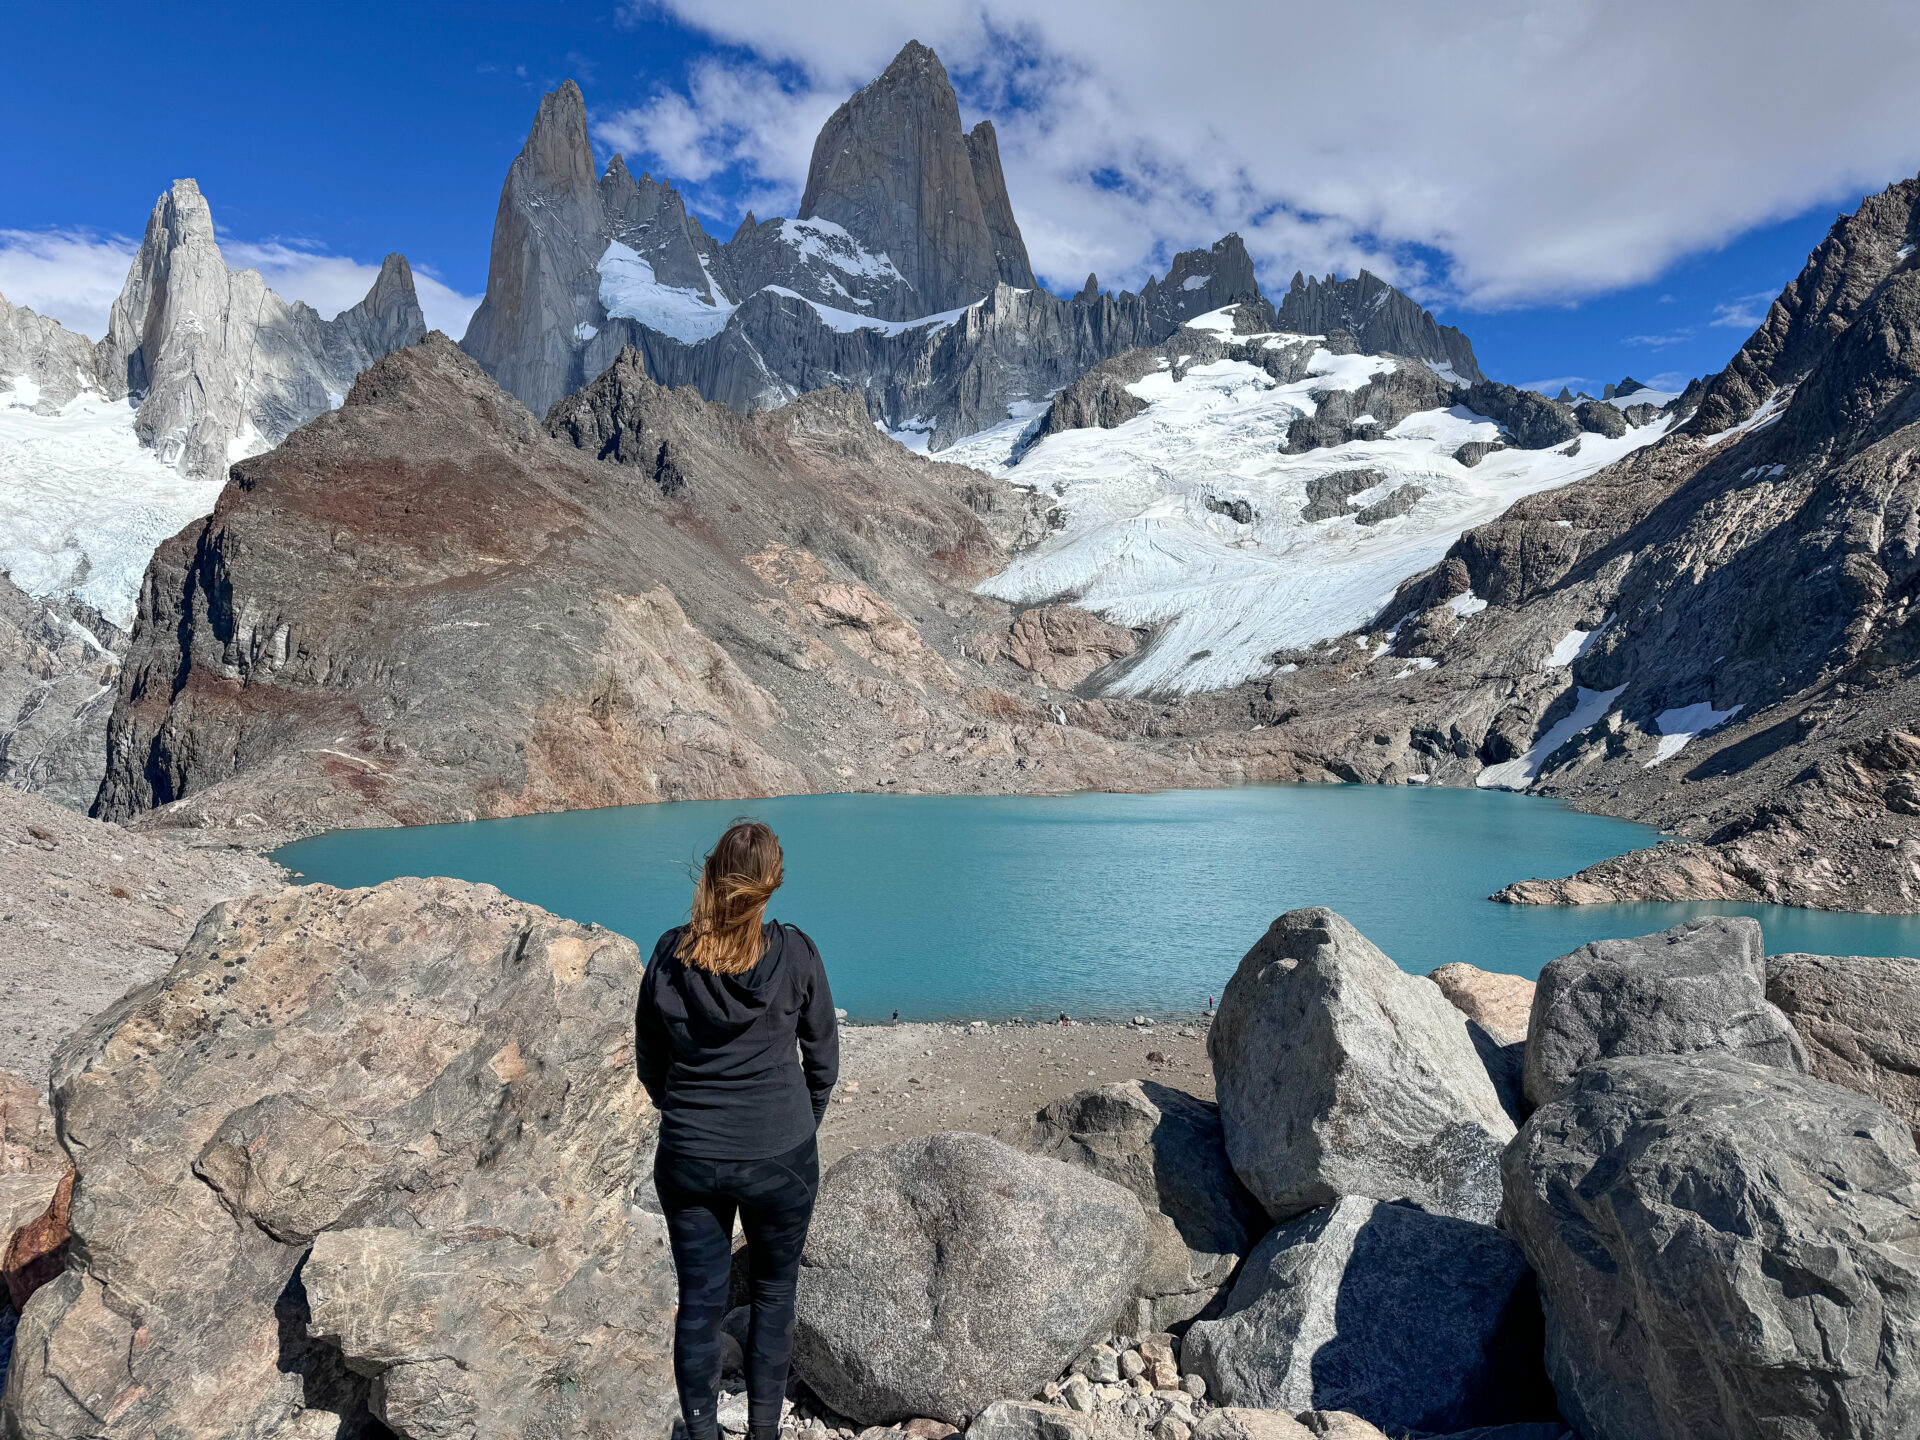 Solo travel in Argentina is a common sight, even on the hiking trails 